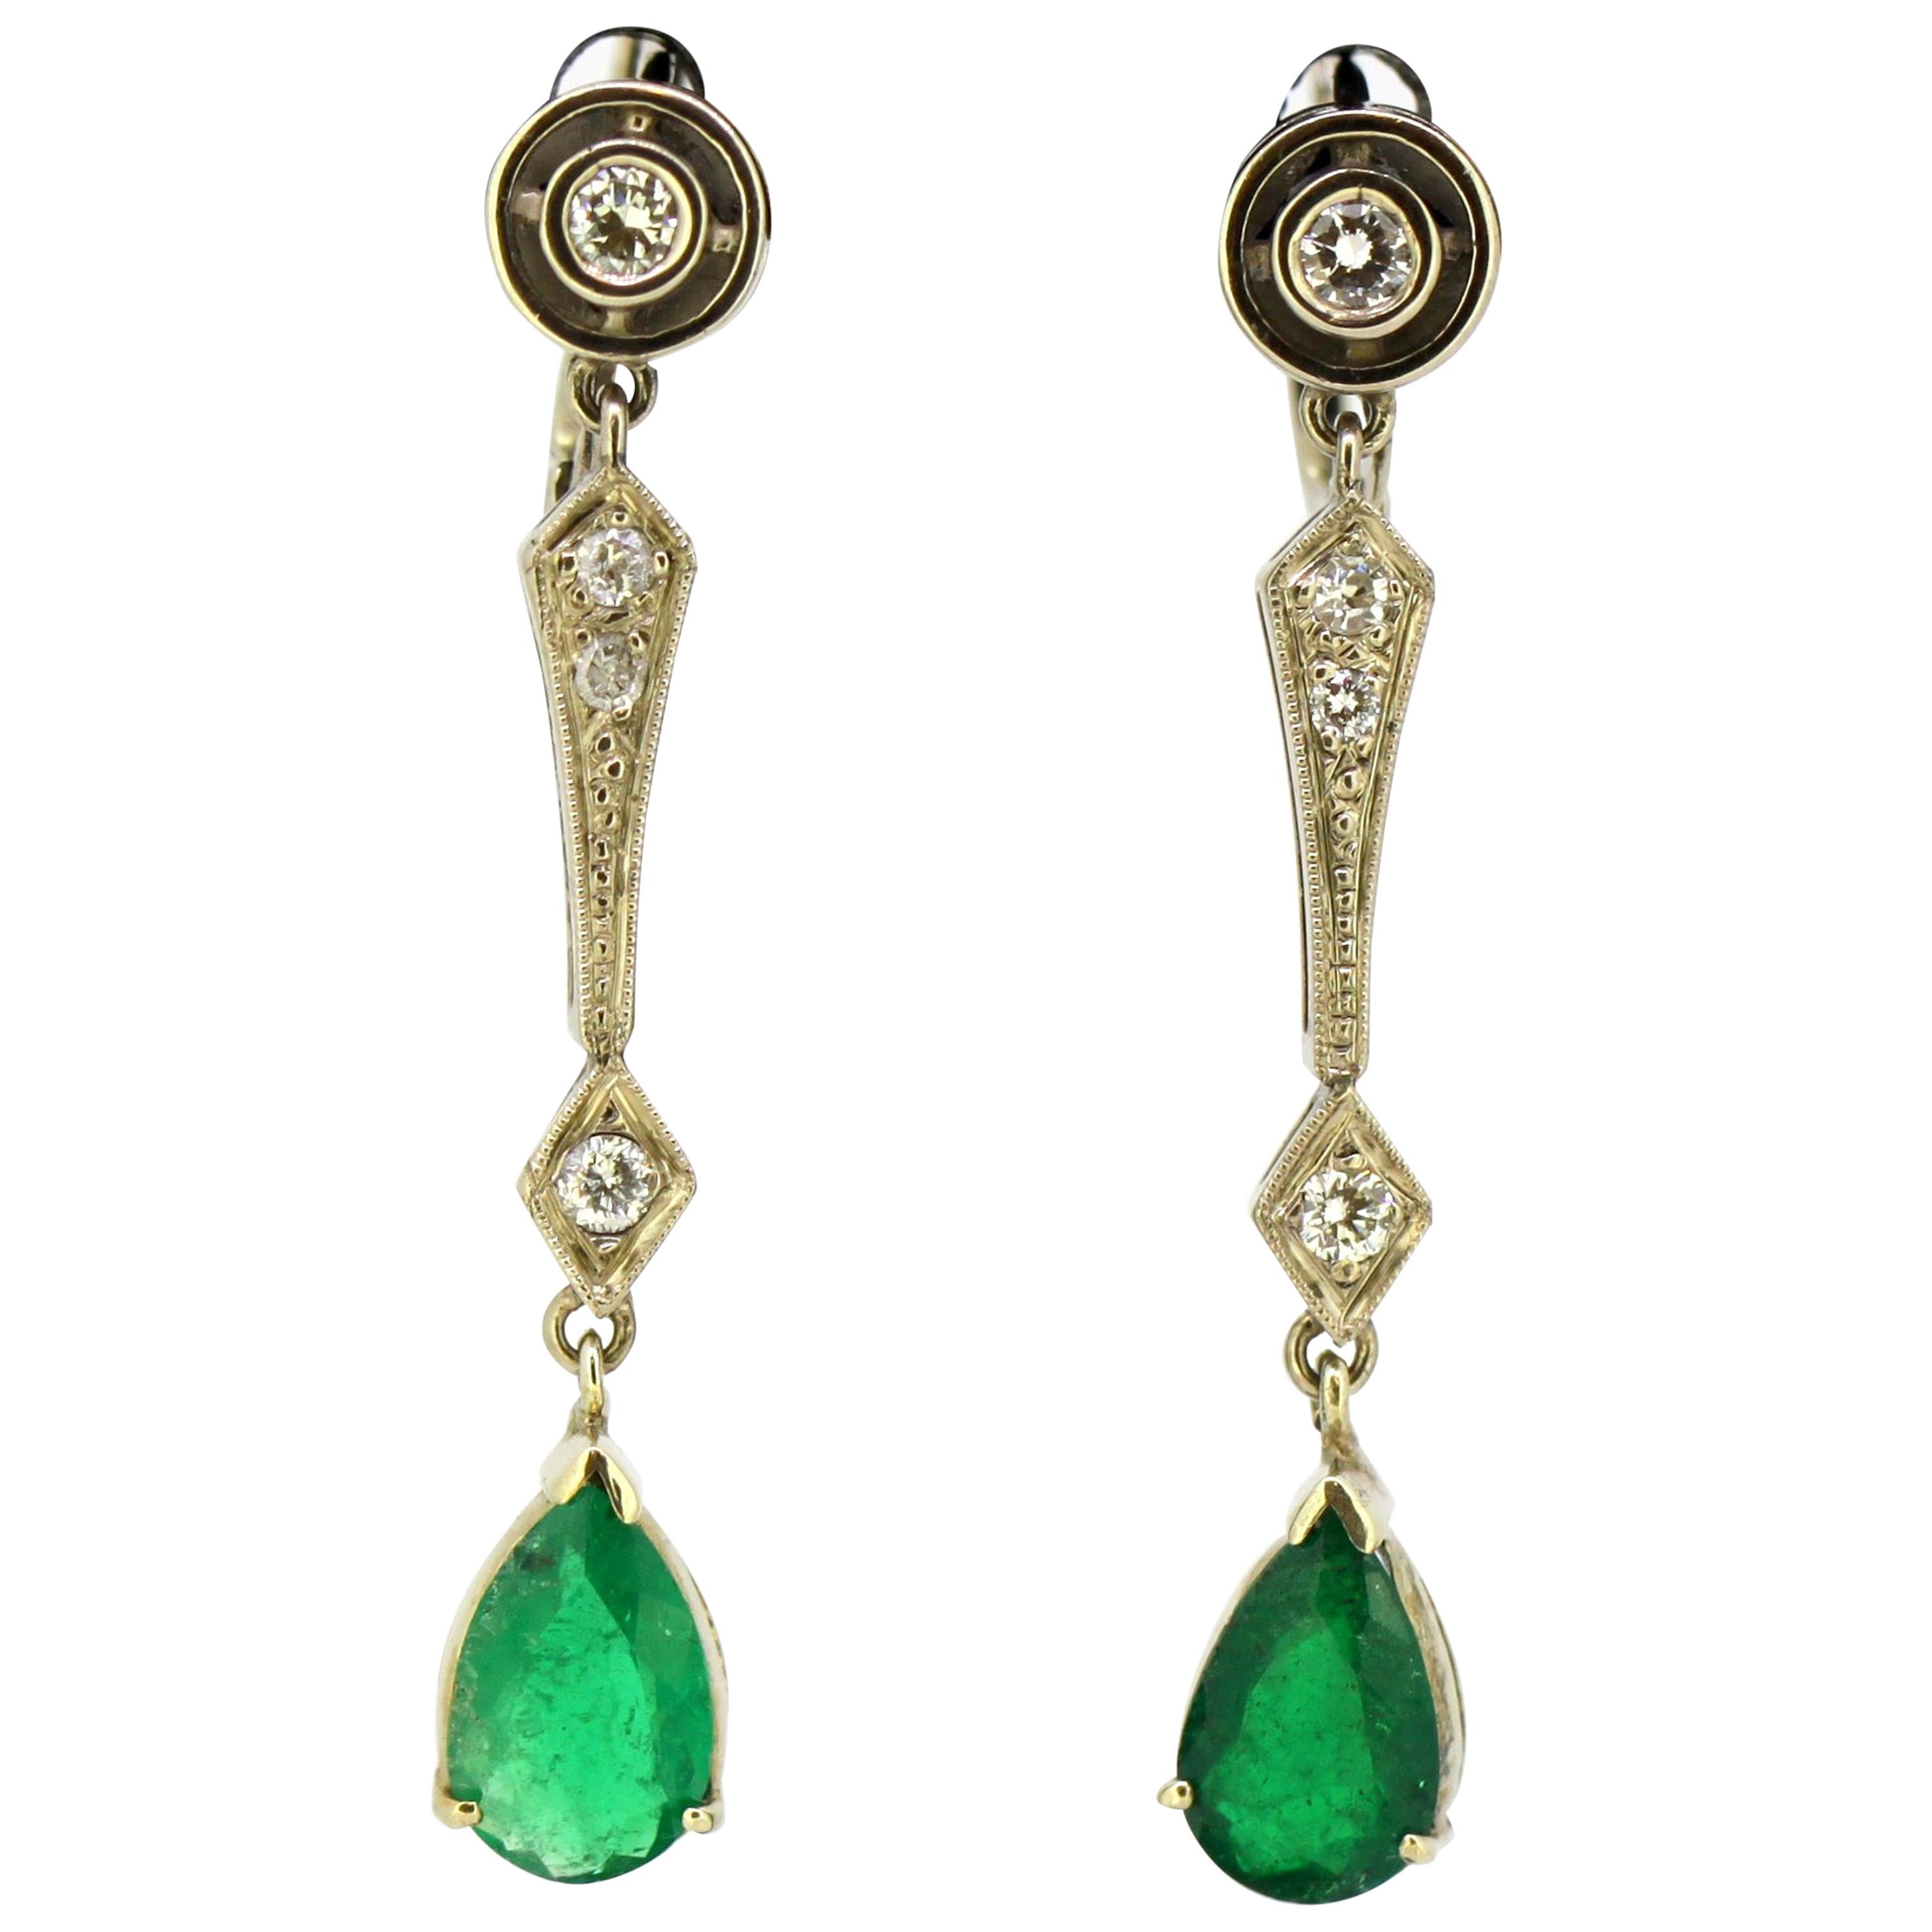 Art Deco 18 Karat Gold Ladies Clip-On Earrings with Emeralds and Diamonds, 1920s